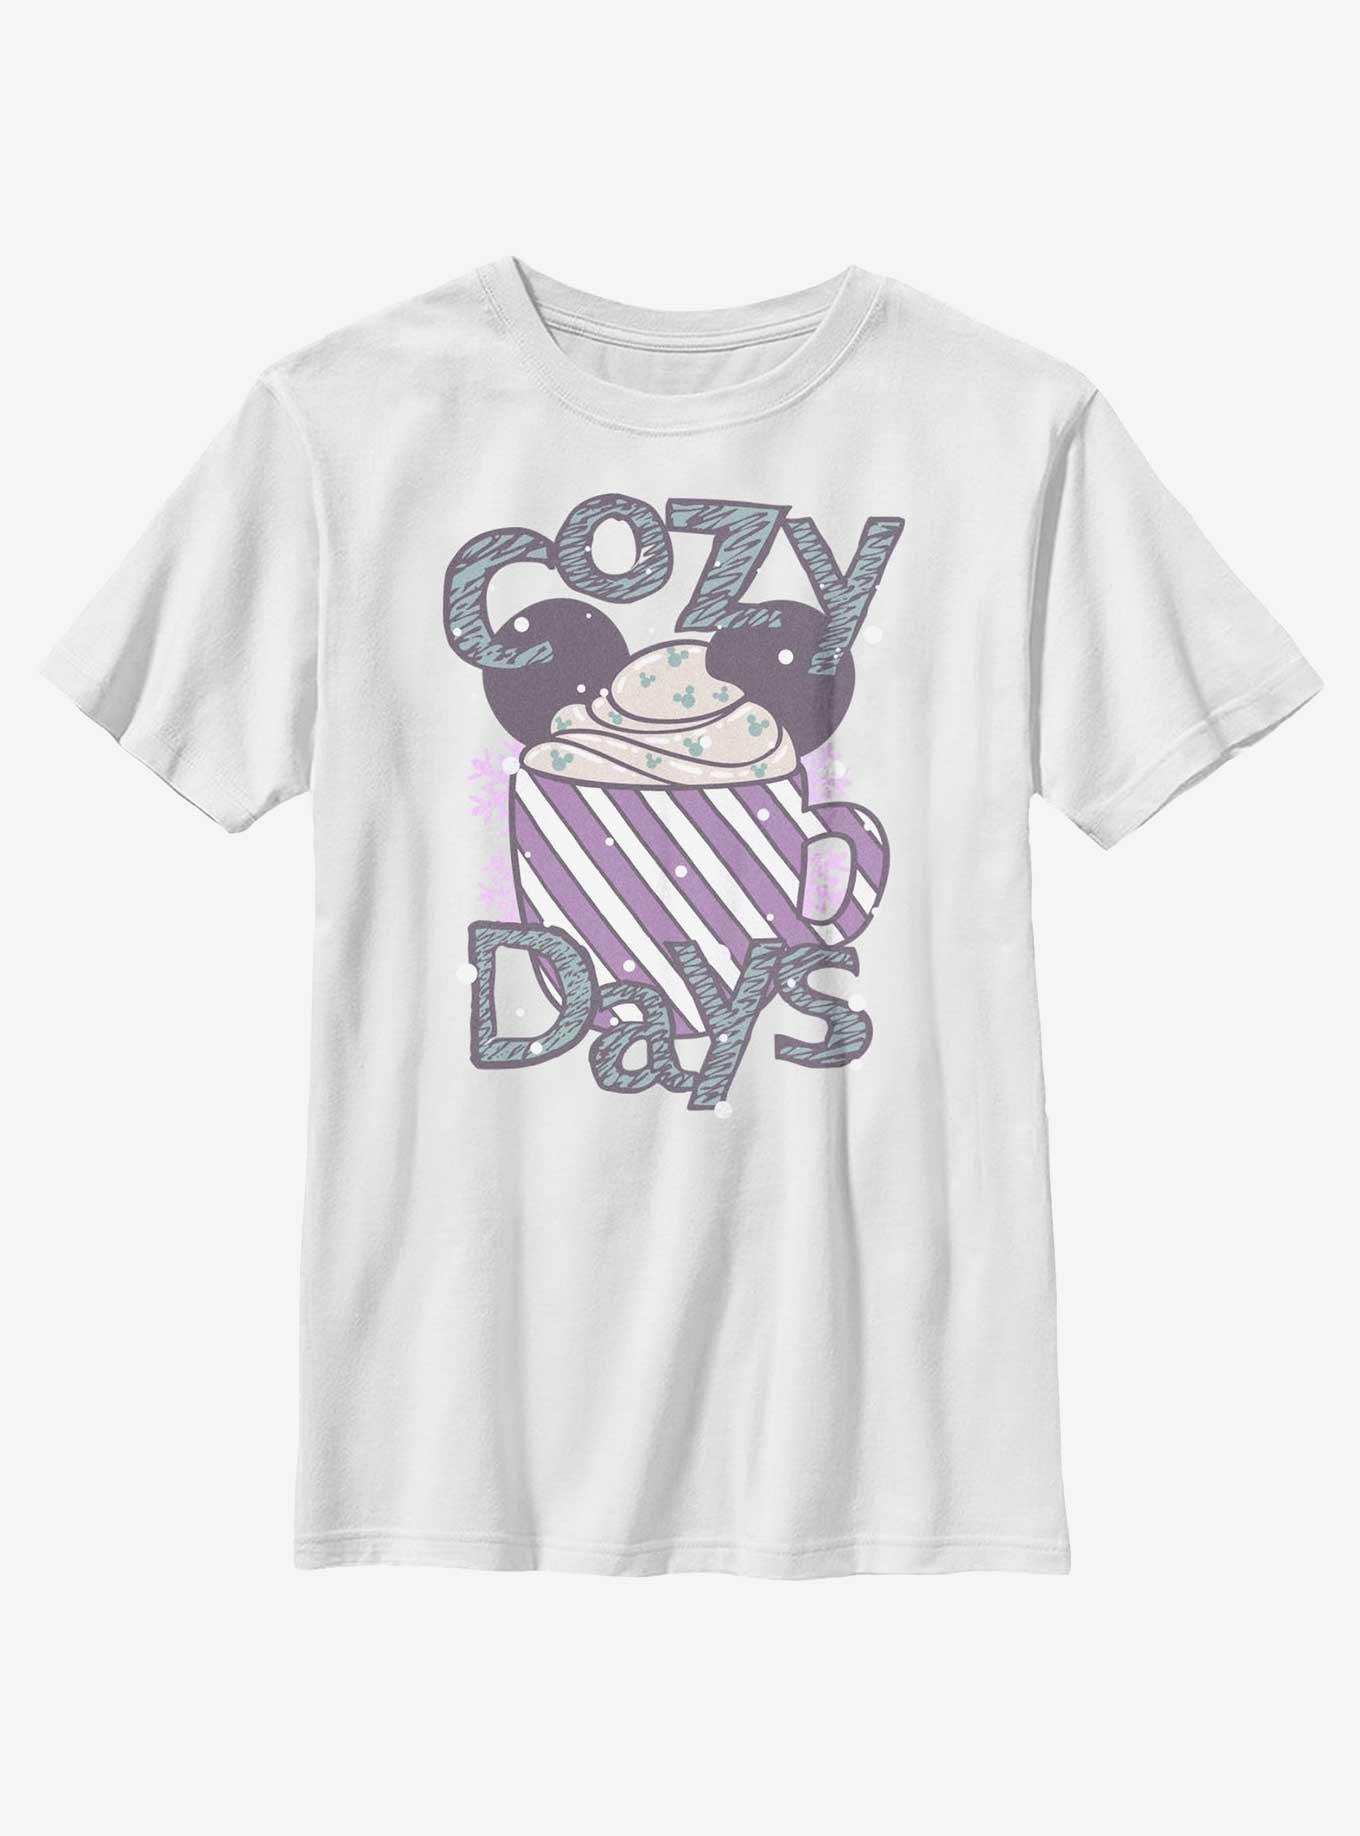 Disney Mickey Mouse Cozy Days Hot Cocoa Youth T-Shirt, WHITE, hi-res